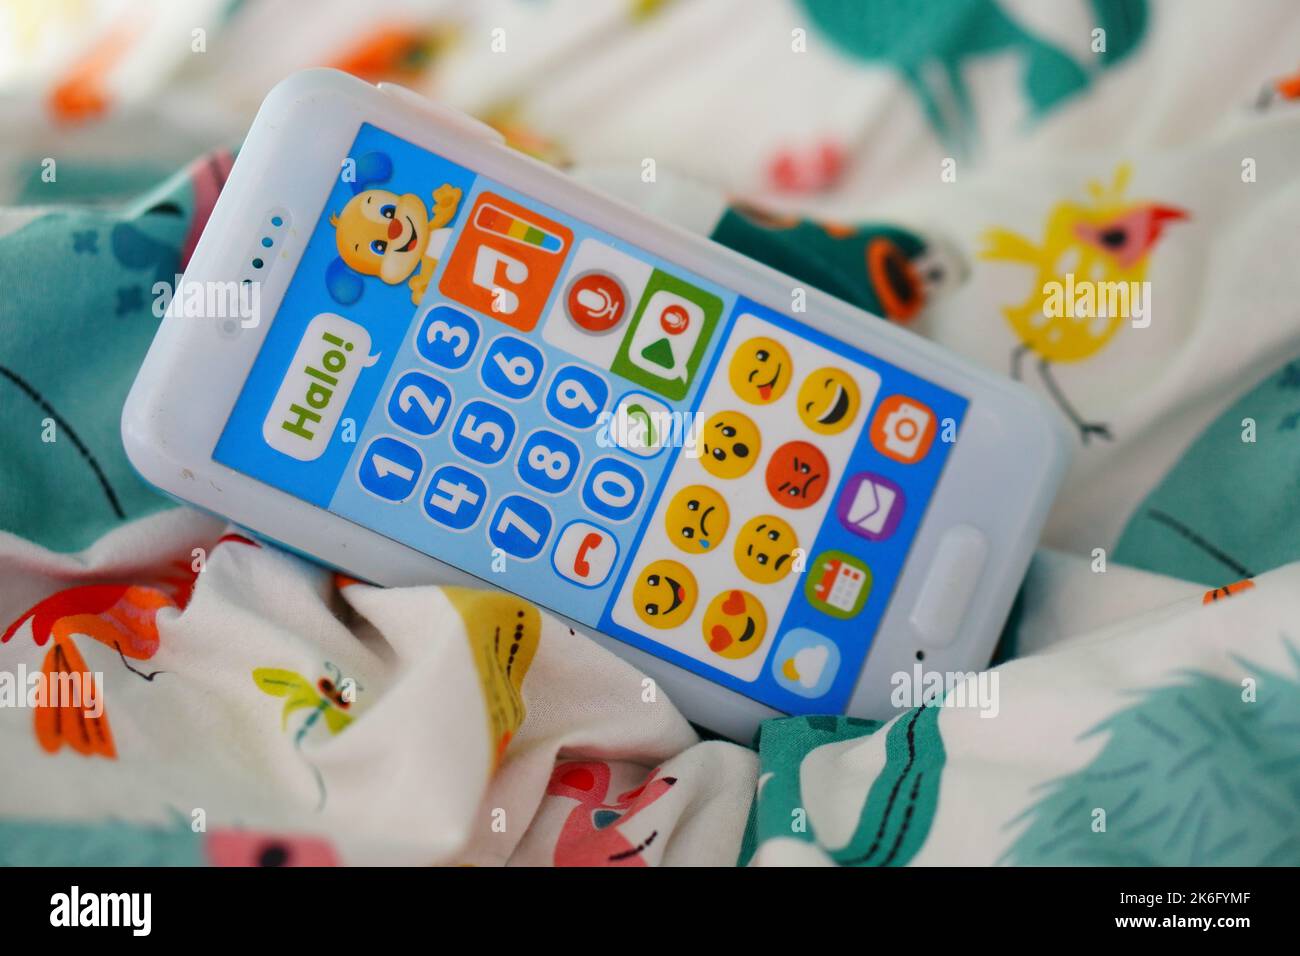 A closeup of a Fisher Price brand toy phone with buttons on a bed sheet Stock Photo